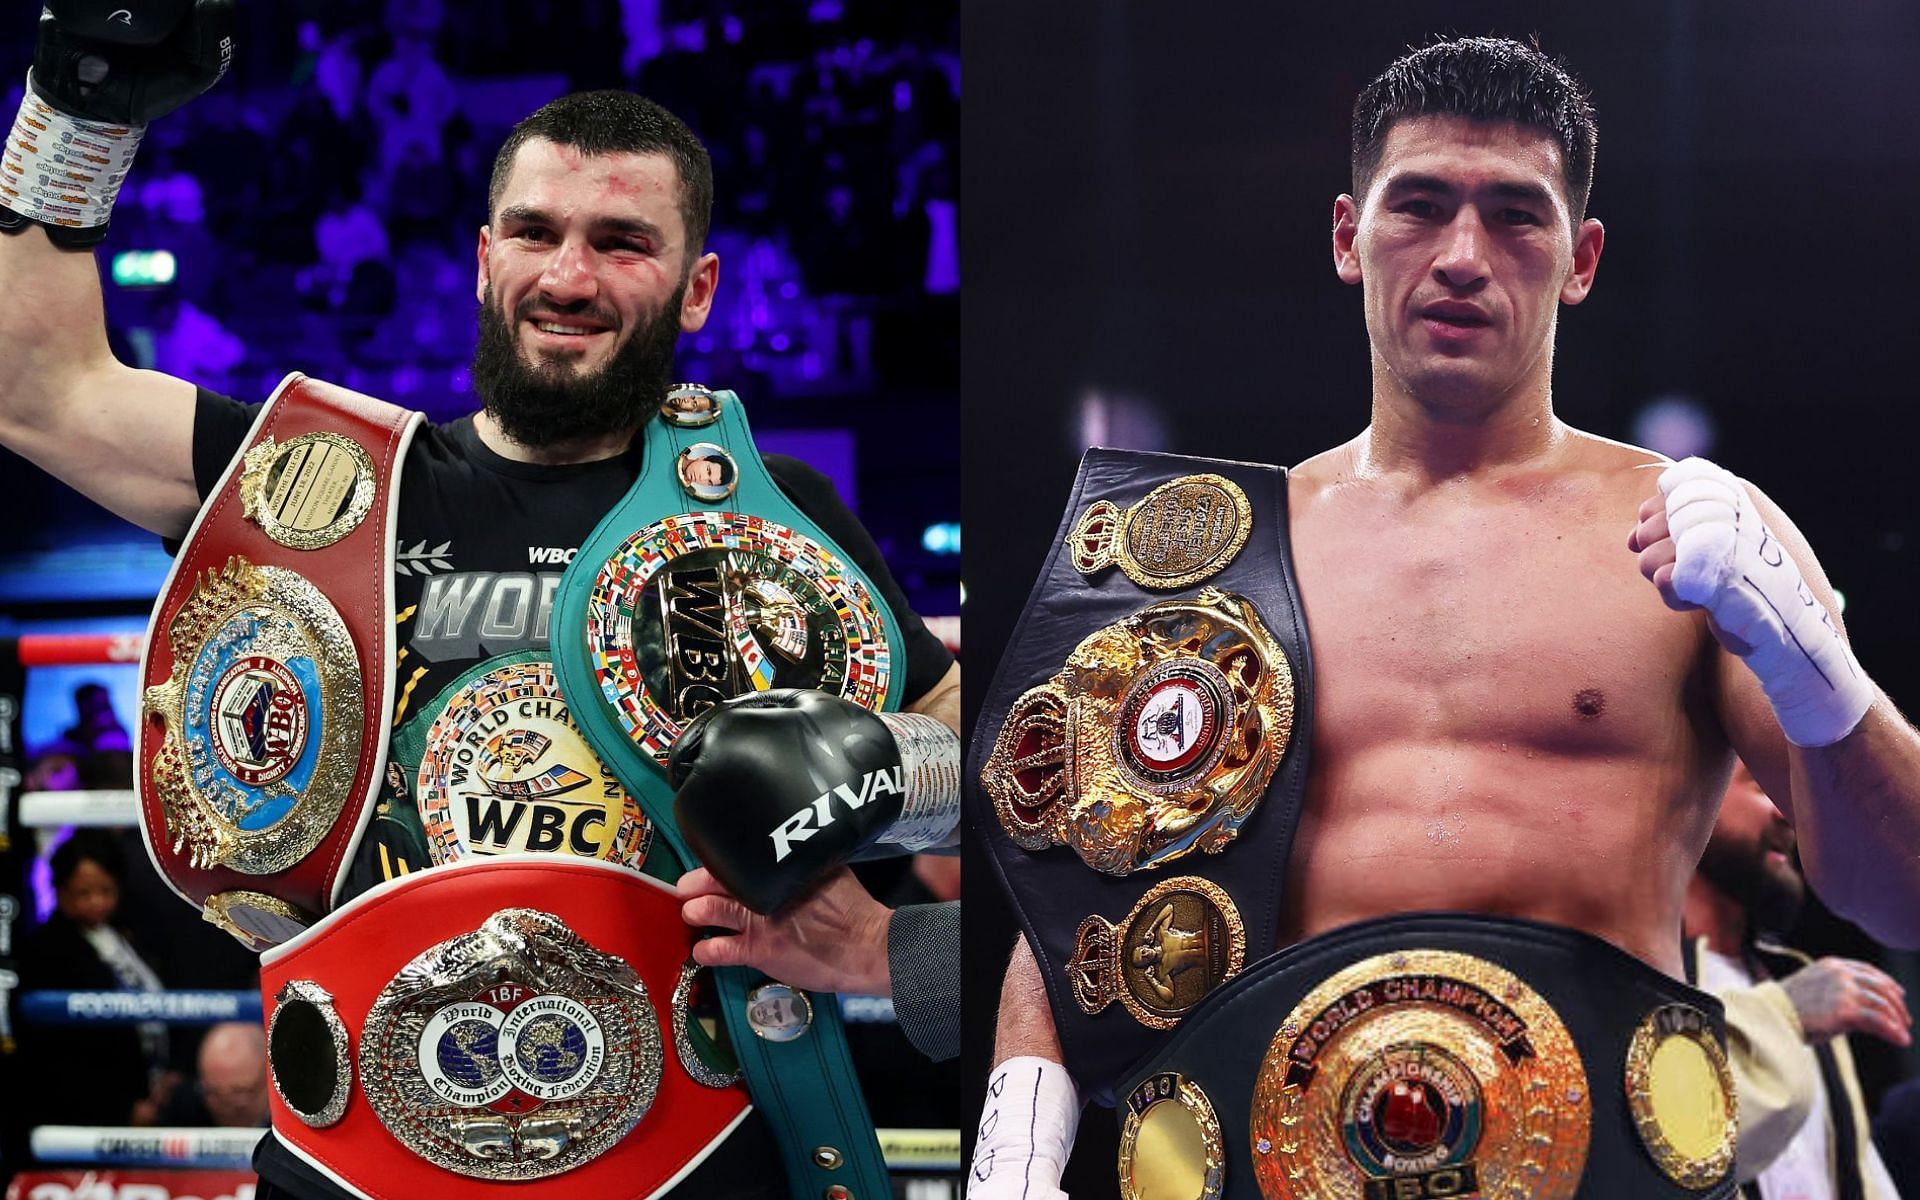 Artur Beterbiev (left) and Dmitry Bivol (right) move closer to agreeign a deal for an undisputed light heavyweight title clash [Images Courtesy: @GettyImages]